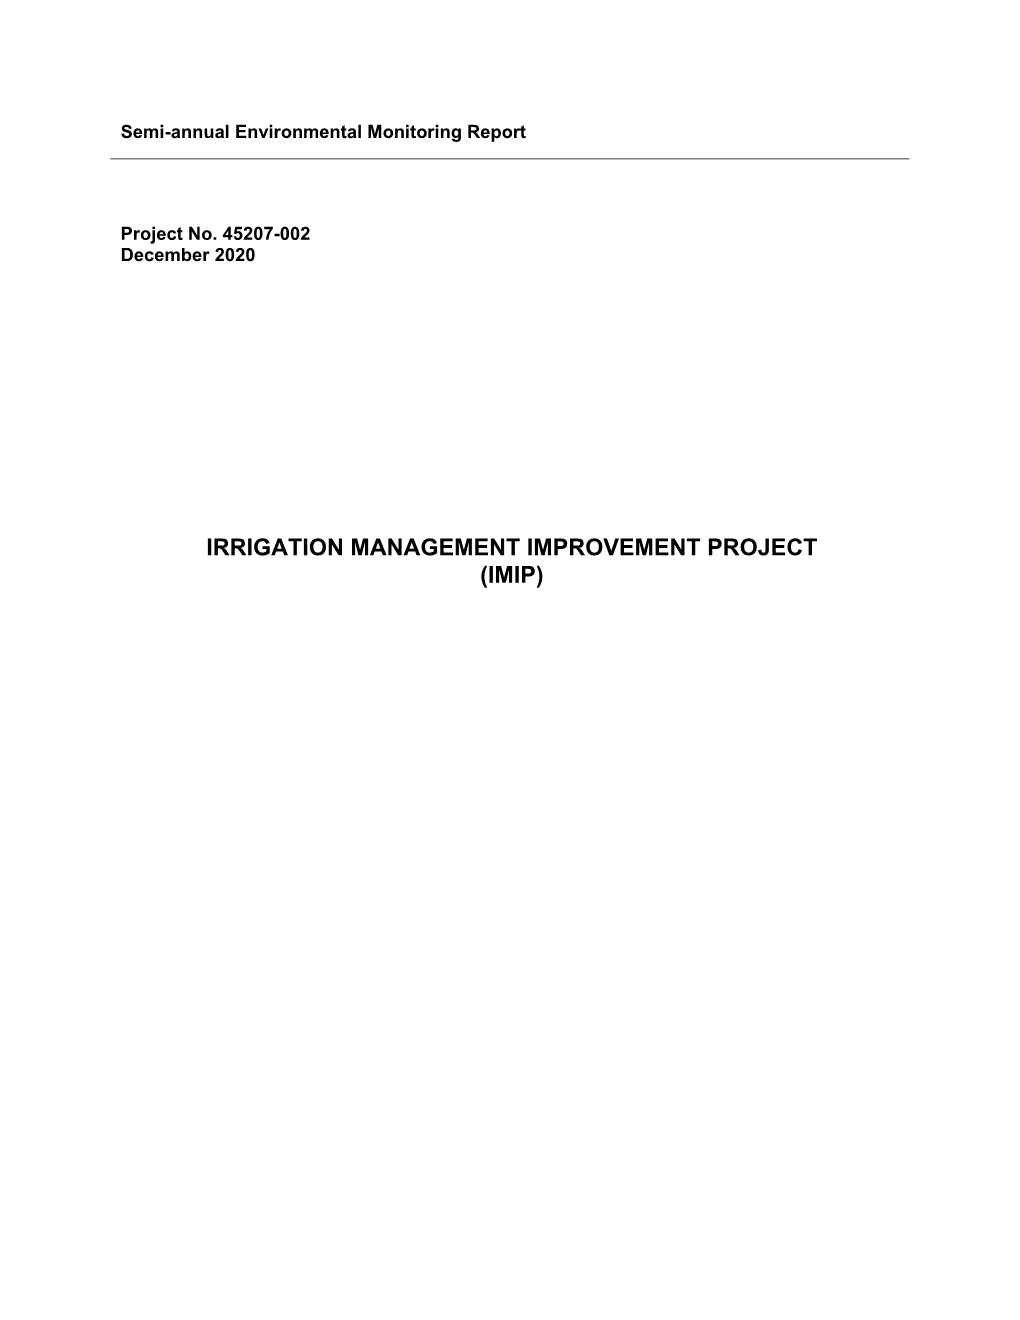 IRRIGATION MANAGEMENT IMPROVEMENT PROJECT (IMIP) This Semi-Annual Environmental Monitoring Report Is a Document of the Borrower